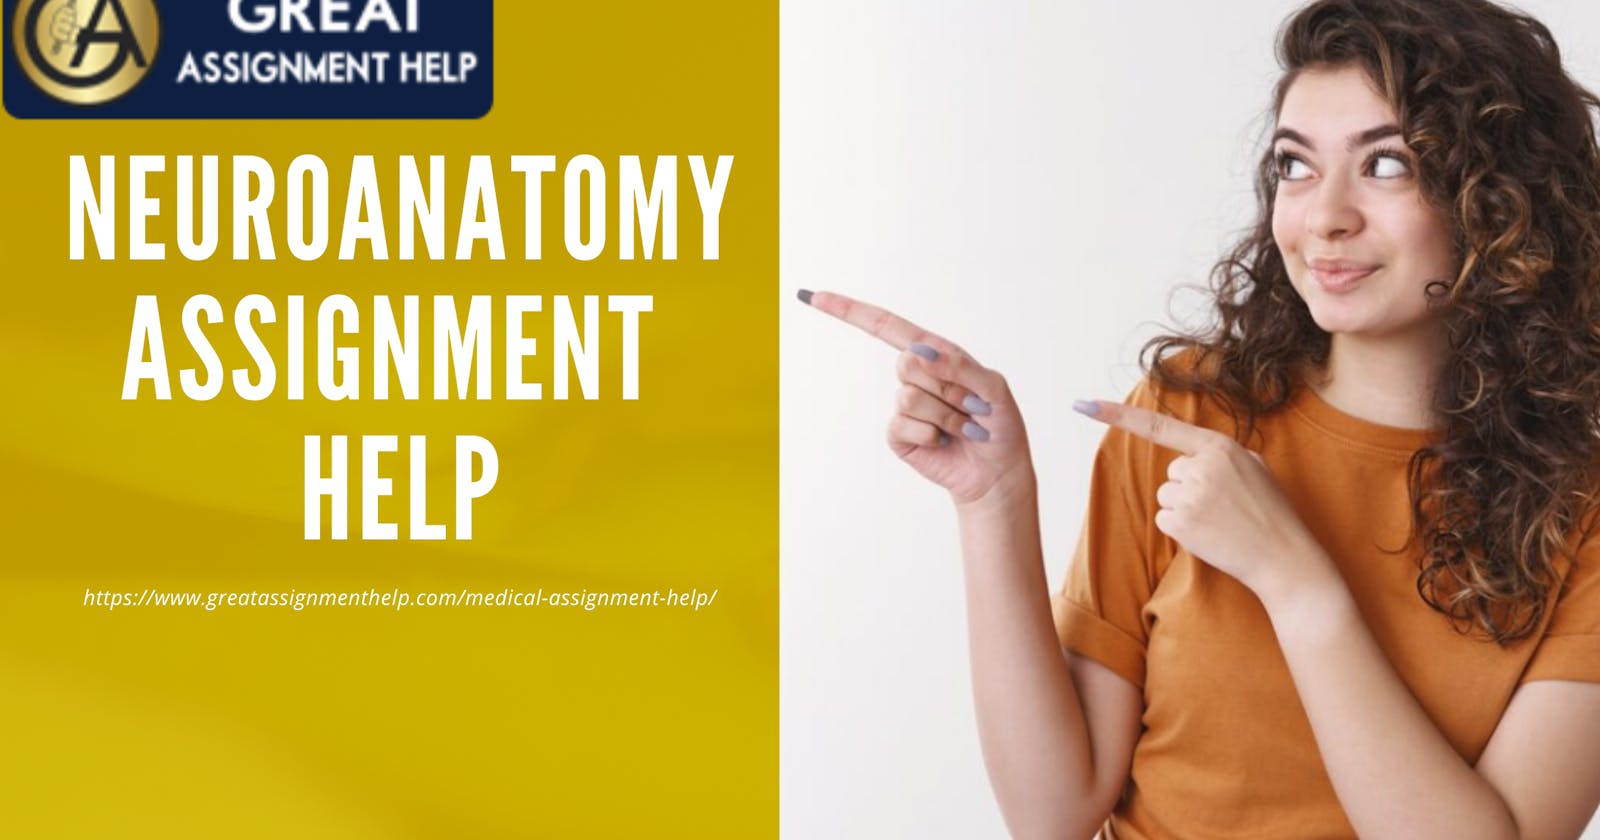 Get the Best Neuroanatomy Assignment Help in the USA